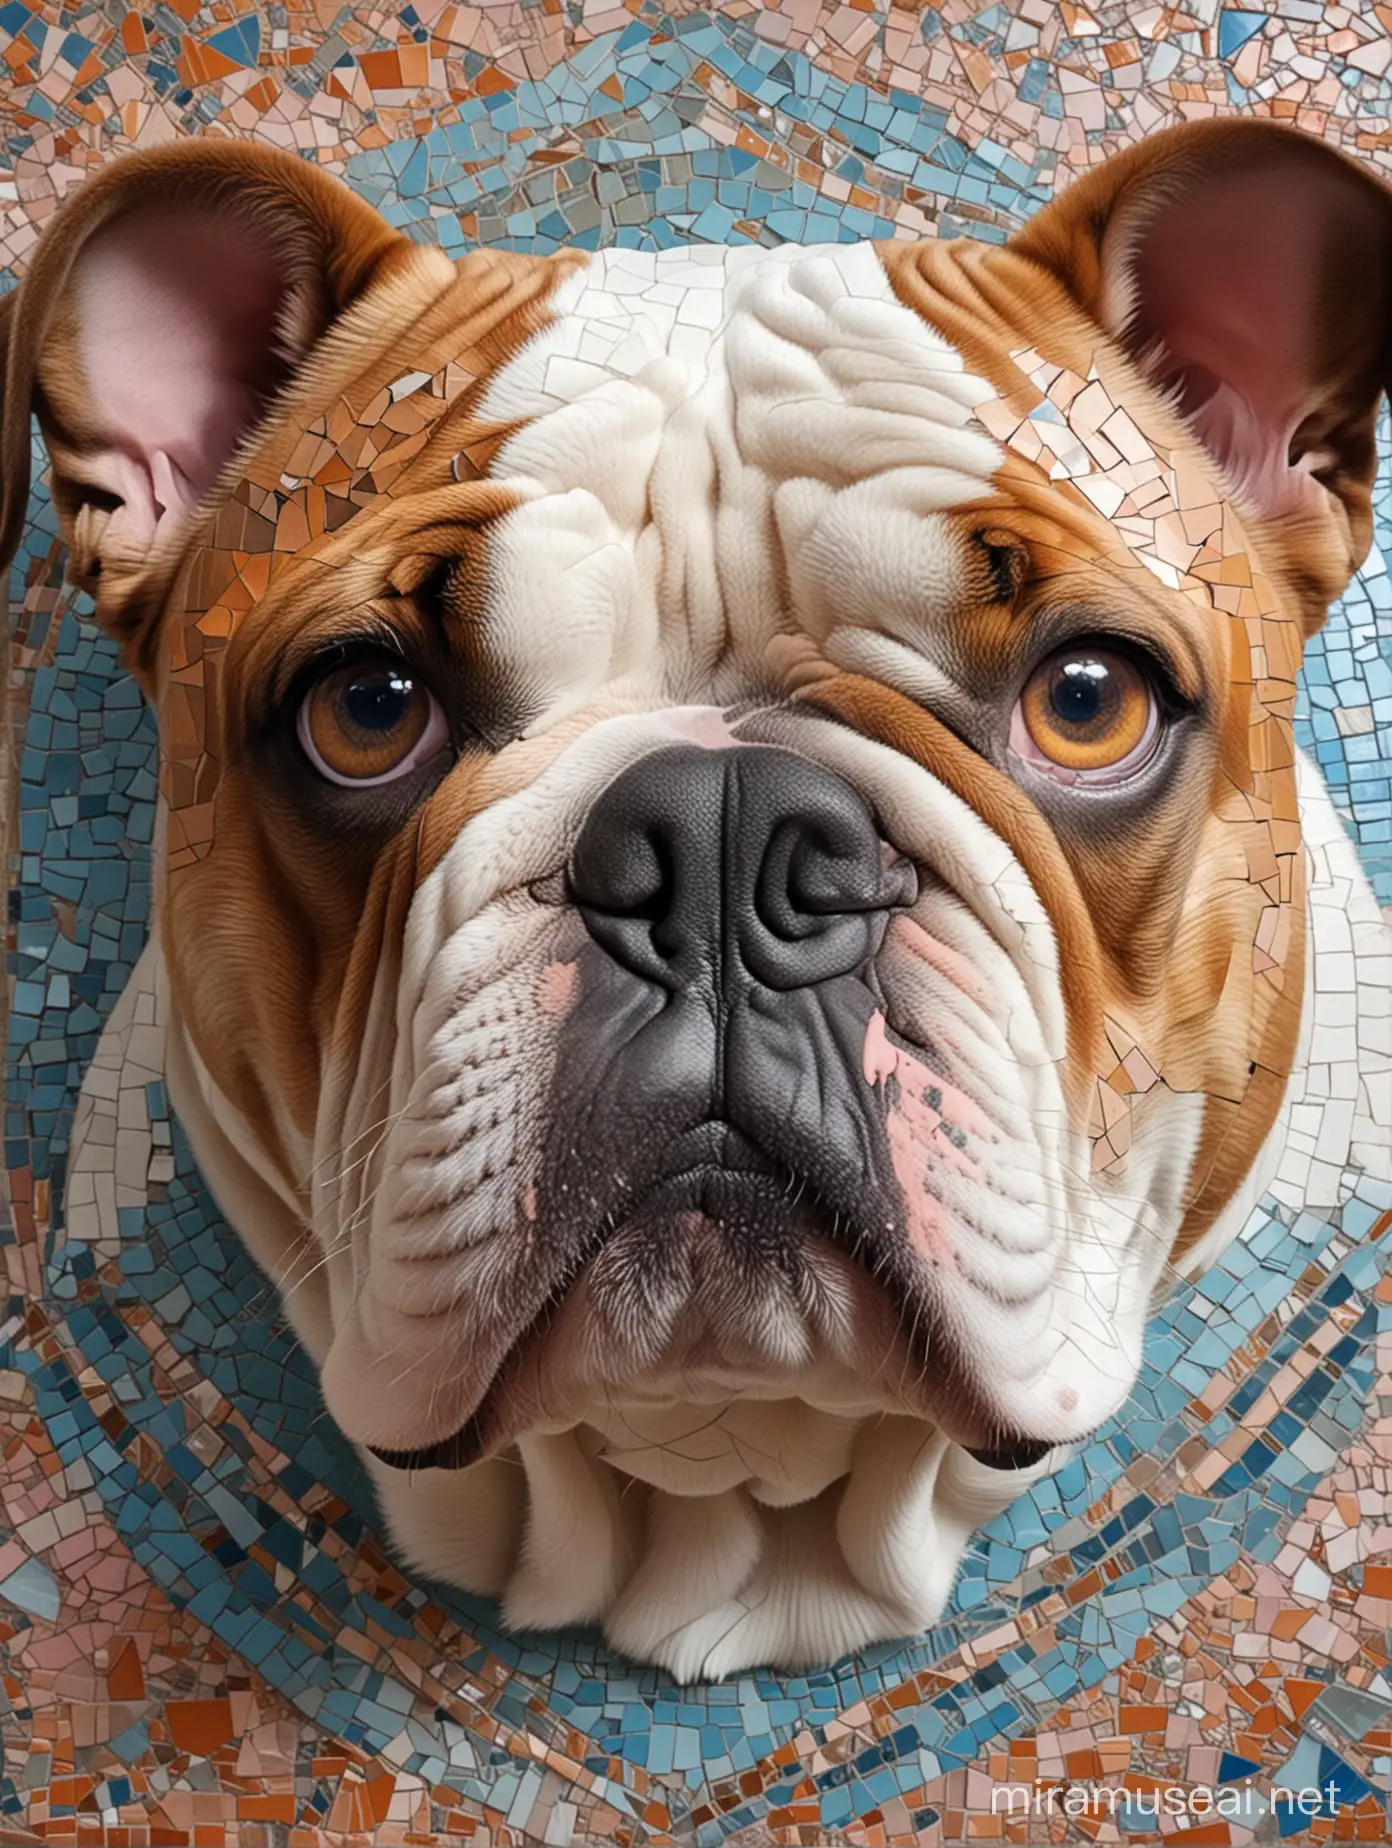 A close-up portrait of a bulldog face in a mosaic collage style. The dog is facing forward symmetrically with her blue eyes being the most detailed, making direct contact with the viewer. depicted with warm tones of orange and brown, contrasting with cool tones of blue and gray in the shards. The geometric shapes composing her face resemble shattered glass or tiles, with dynamic textures and varied colors. Her lips are slightly parted, in a soft pink hue, adding a natural touch to the abstract and angular composition.